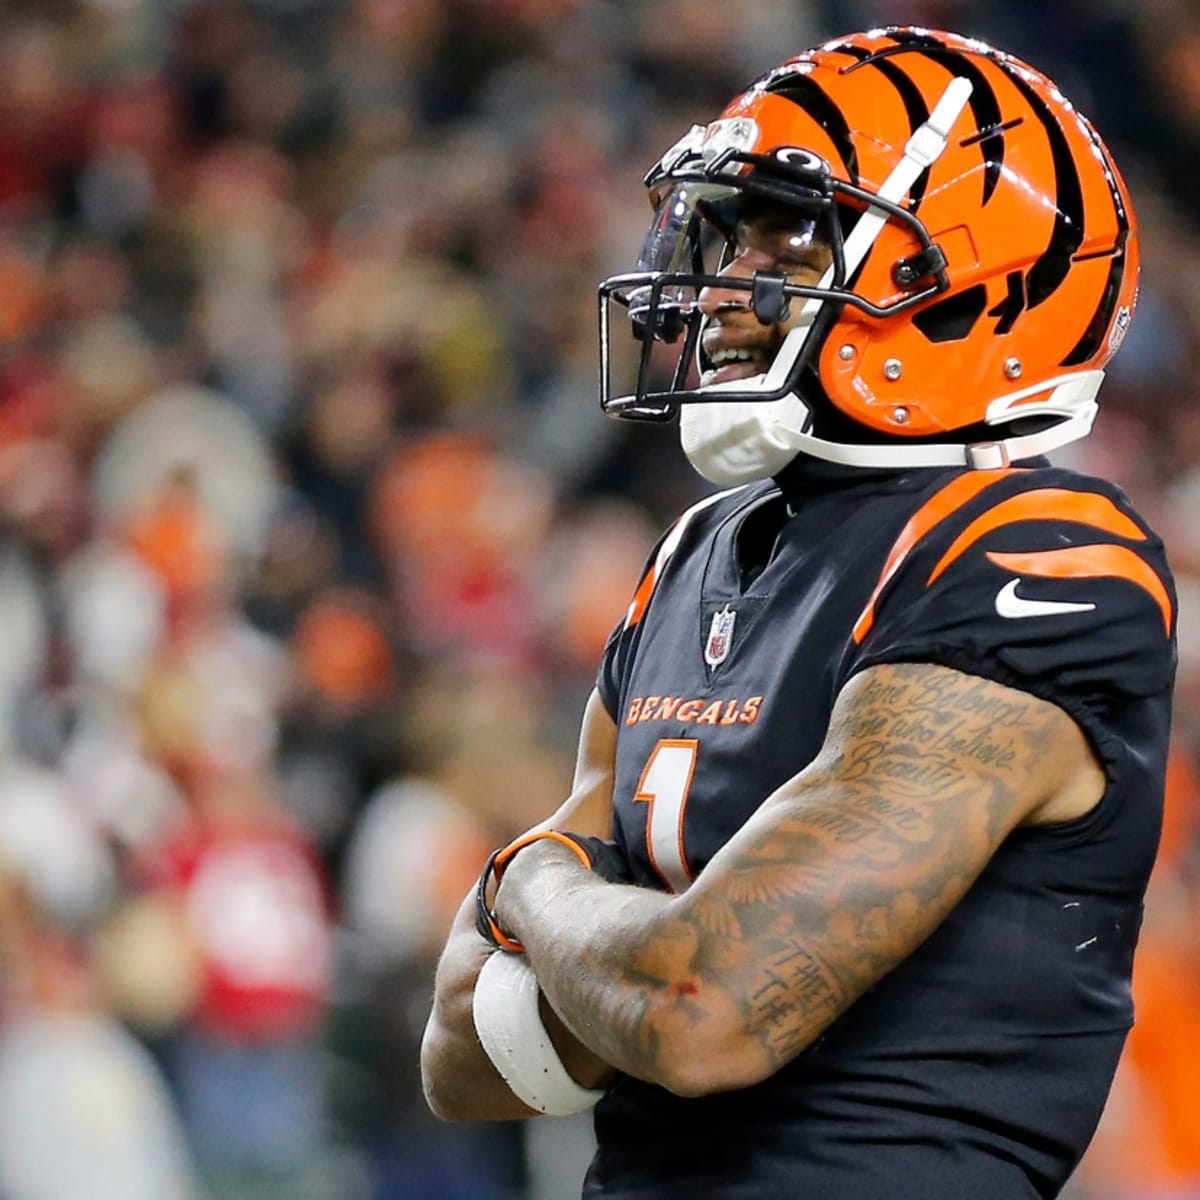 Bengals' Burrow and Chase dominate Ravens as Chiefs slump to another defeat, NFL